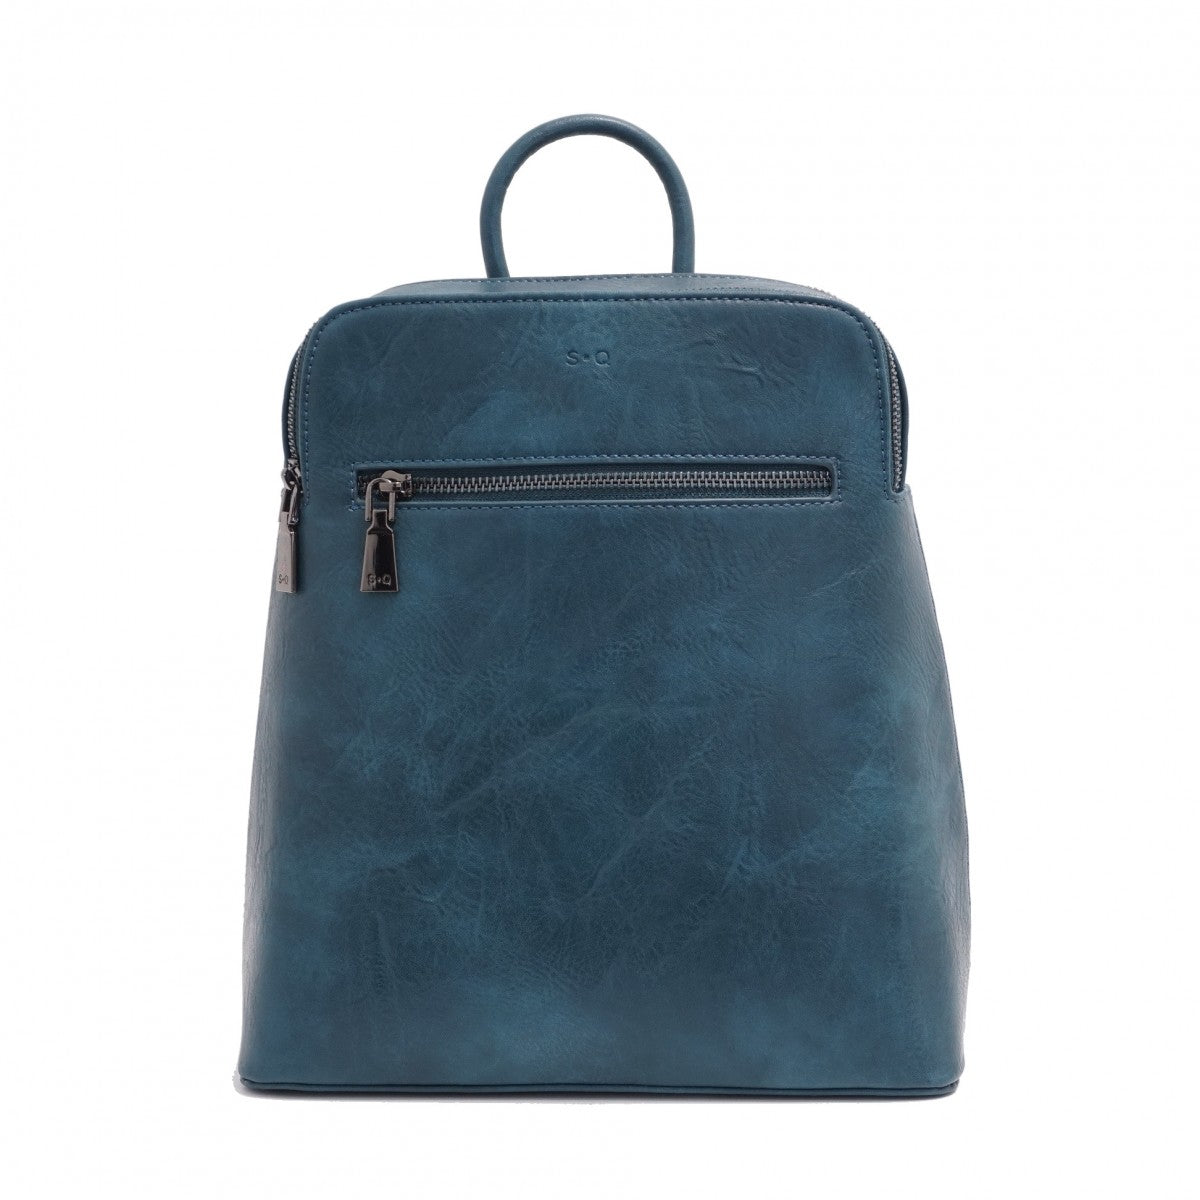 S-Q FEANNA CONVERTIBLE BACKPACK IN DEEP SEA